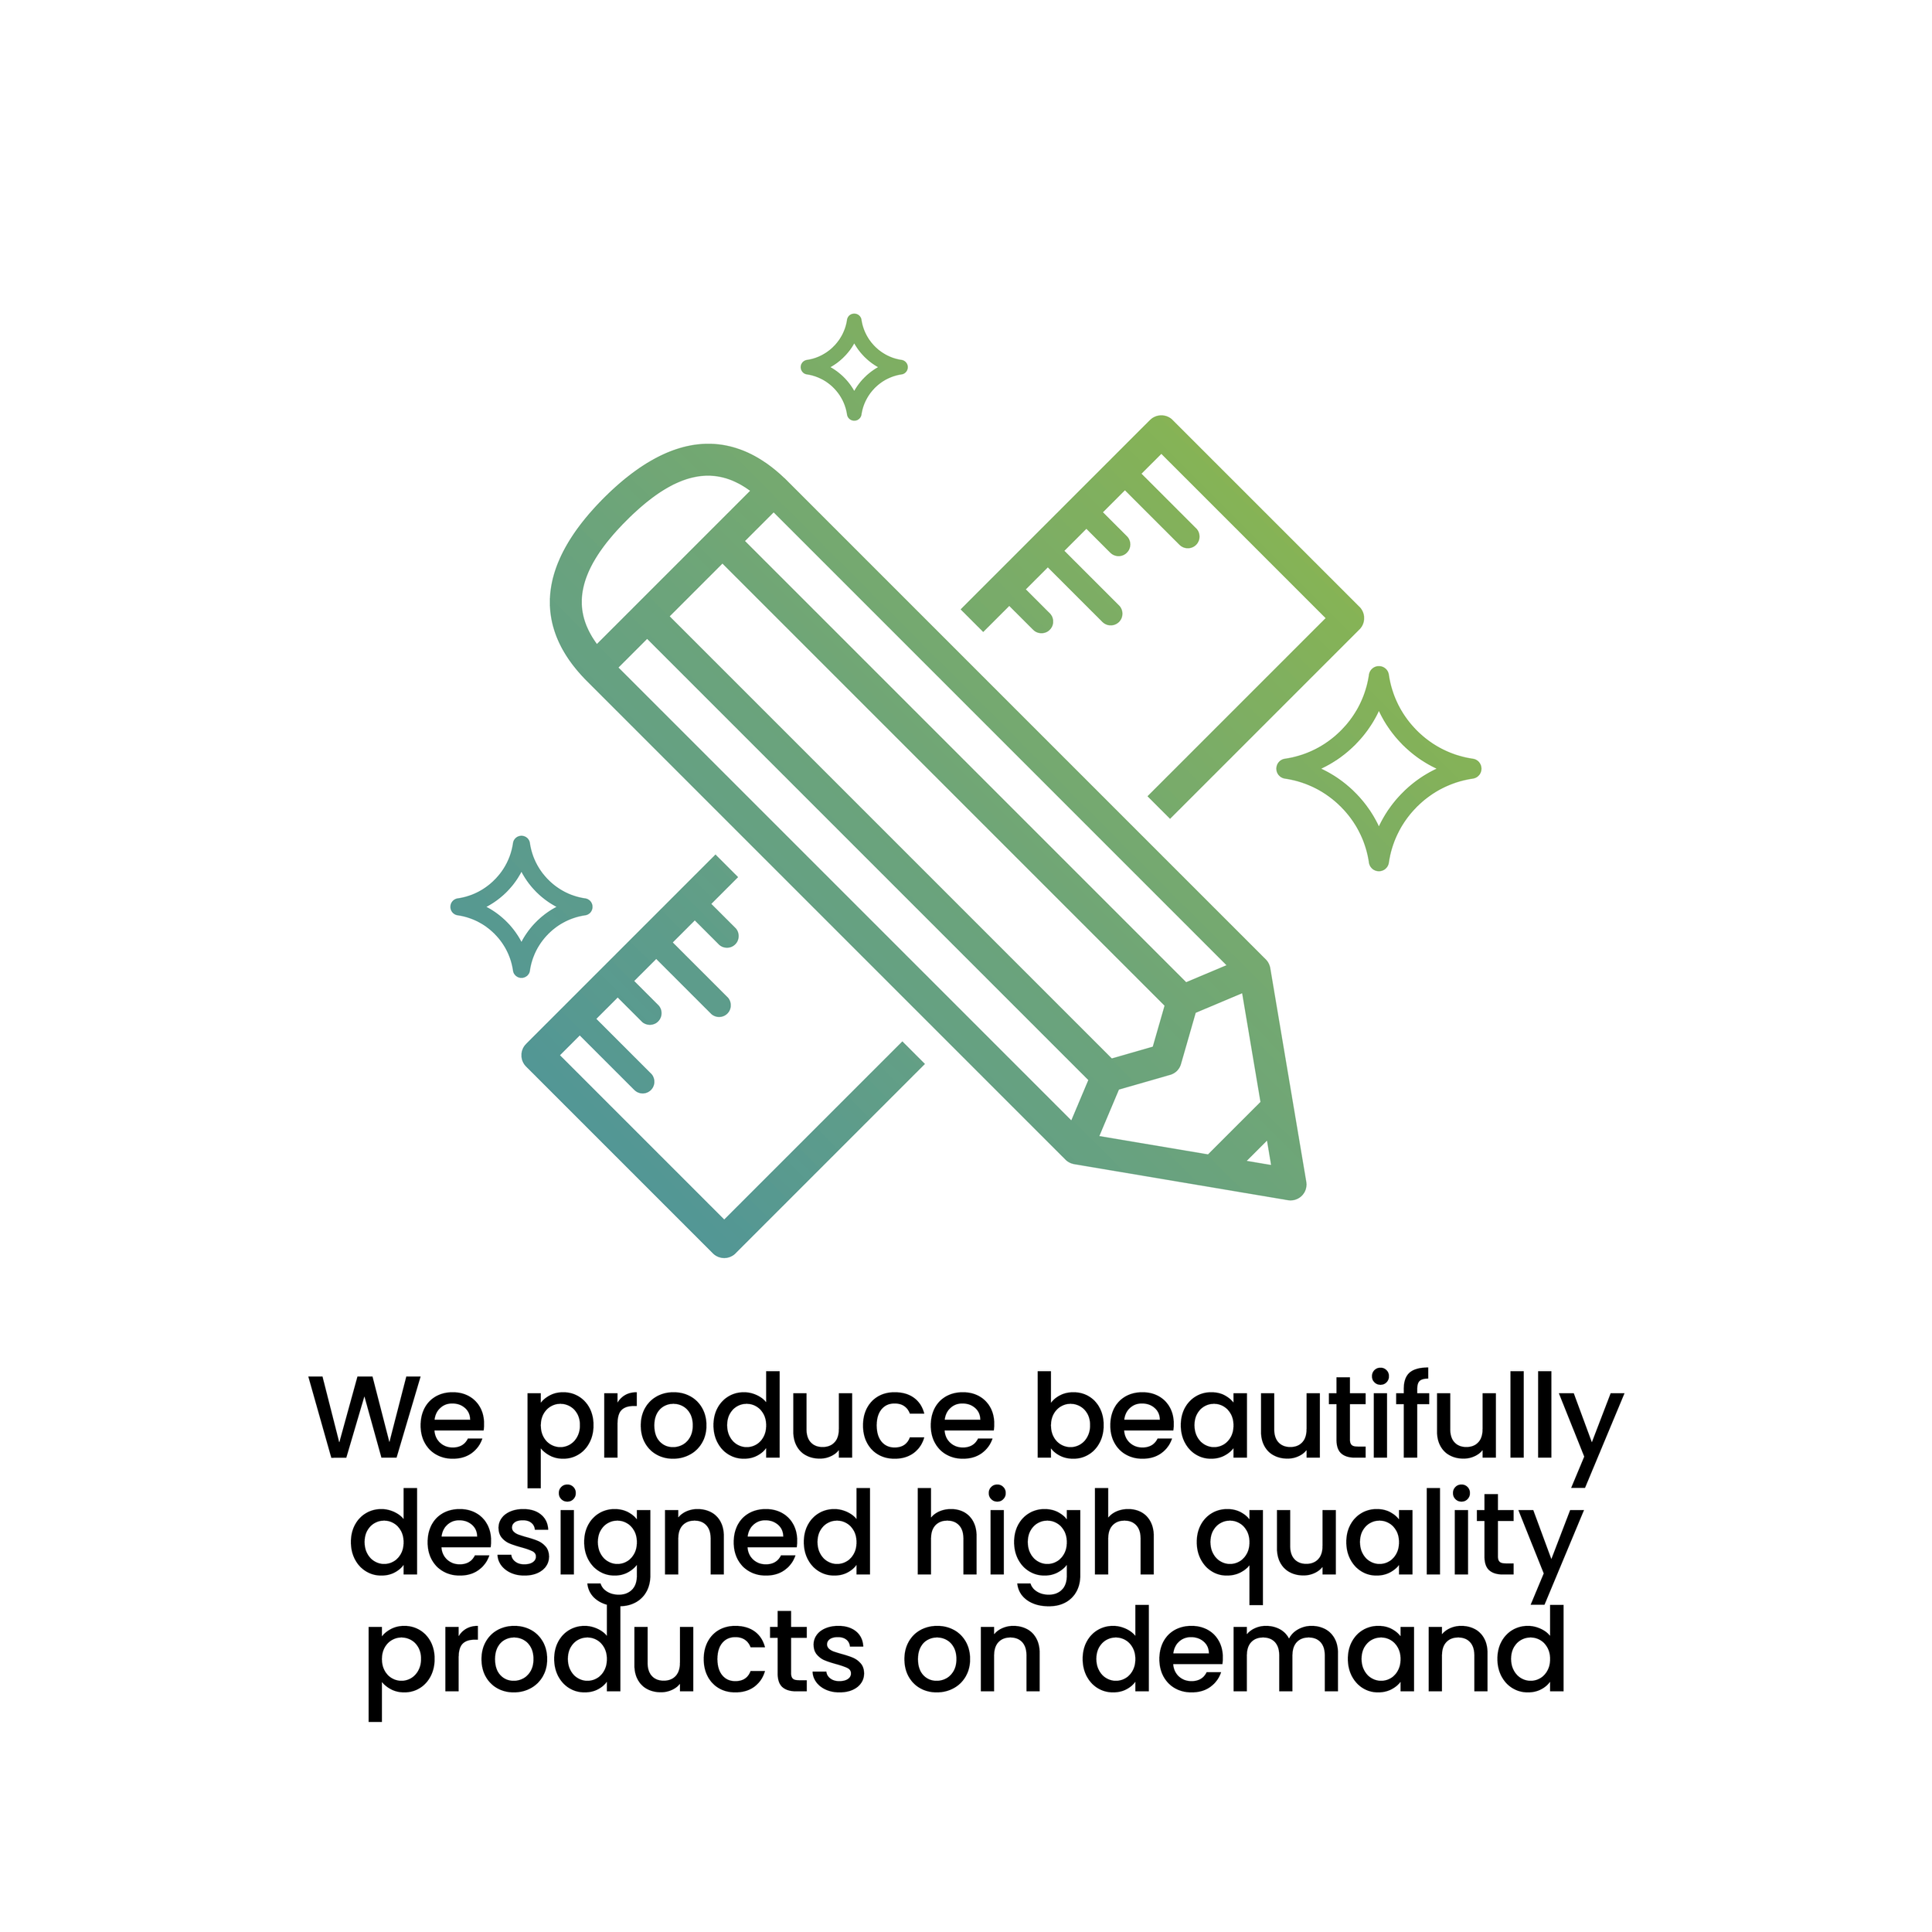 We prodice beautifully designed high quality products on demand